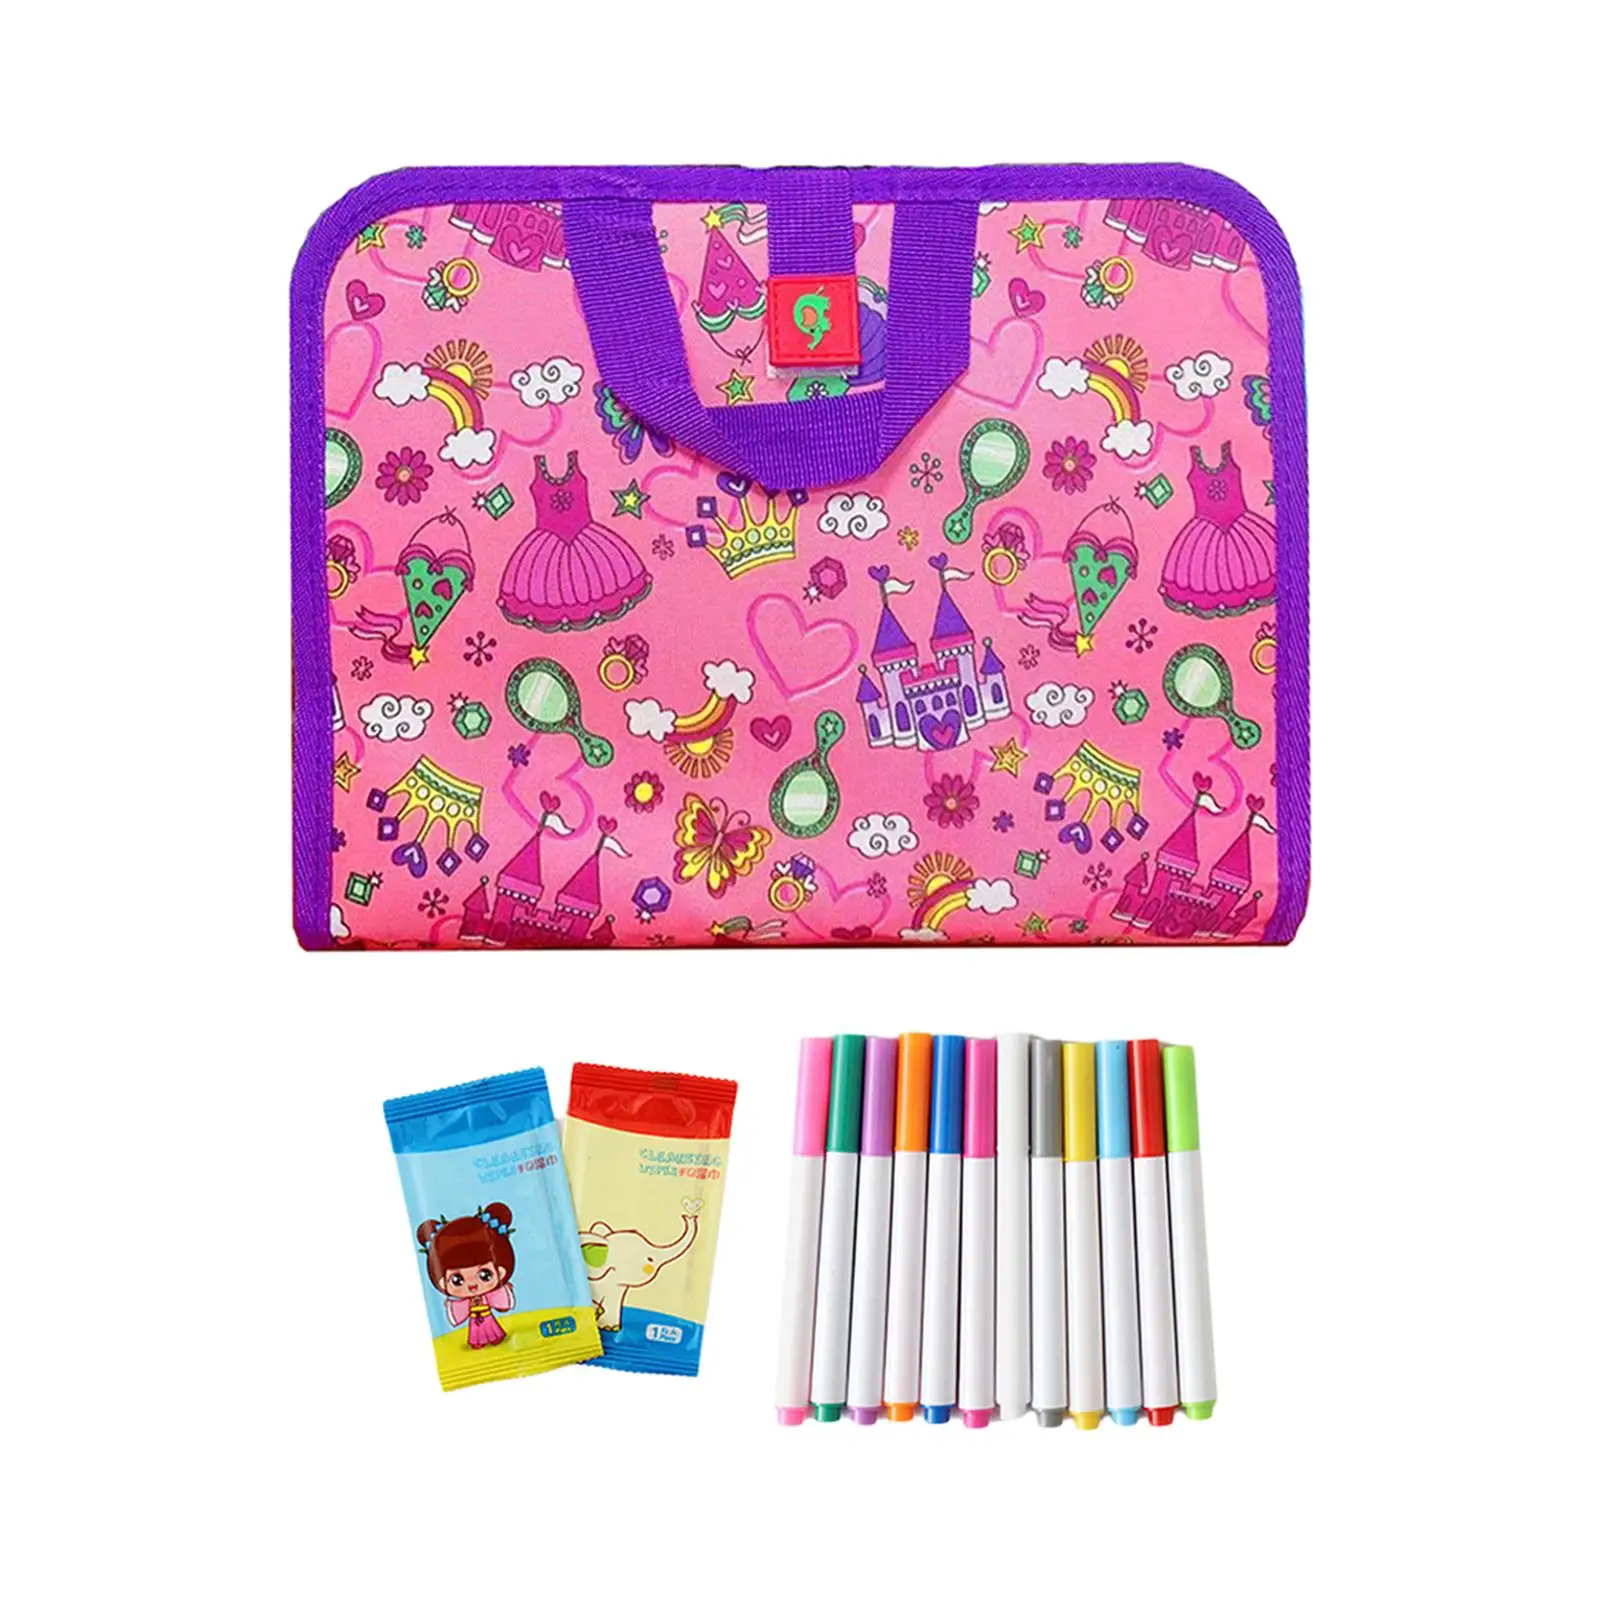 Kids Erasable Book Doodle Set Writing Painting Set Boys Girls Xmas Gift Portable Painting Toys Reusable with 12 Watercolor Pens